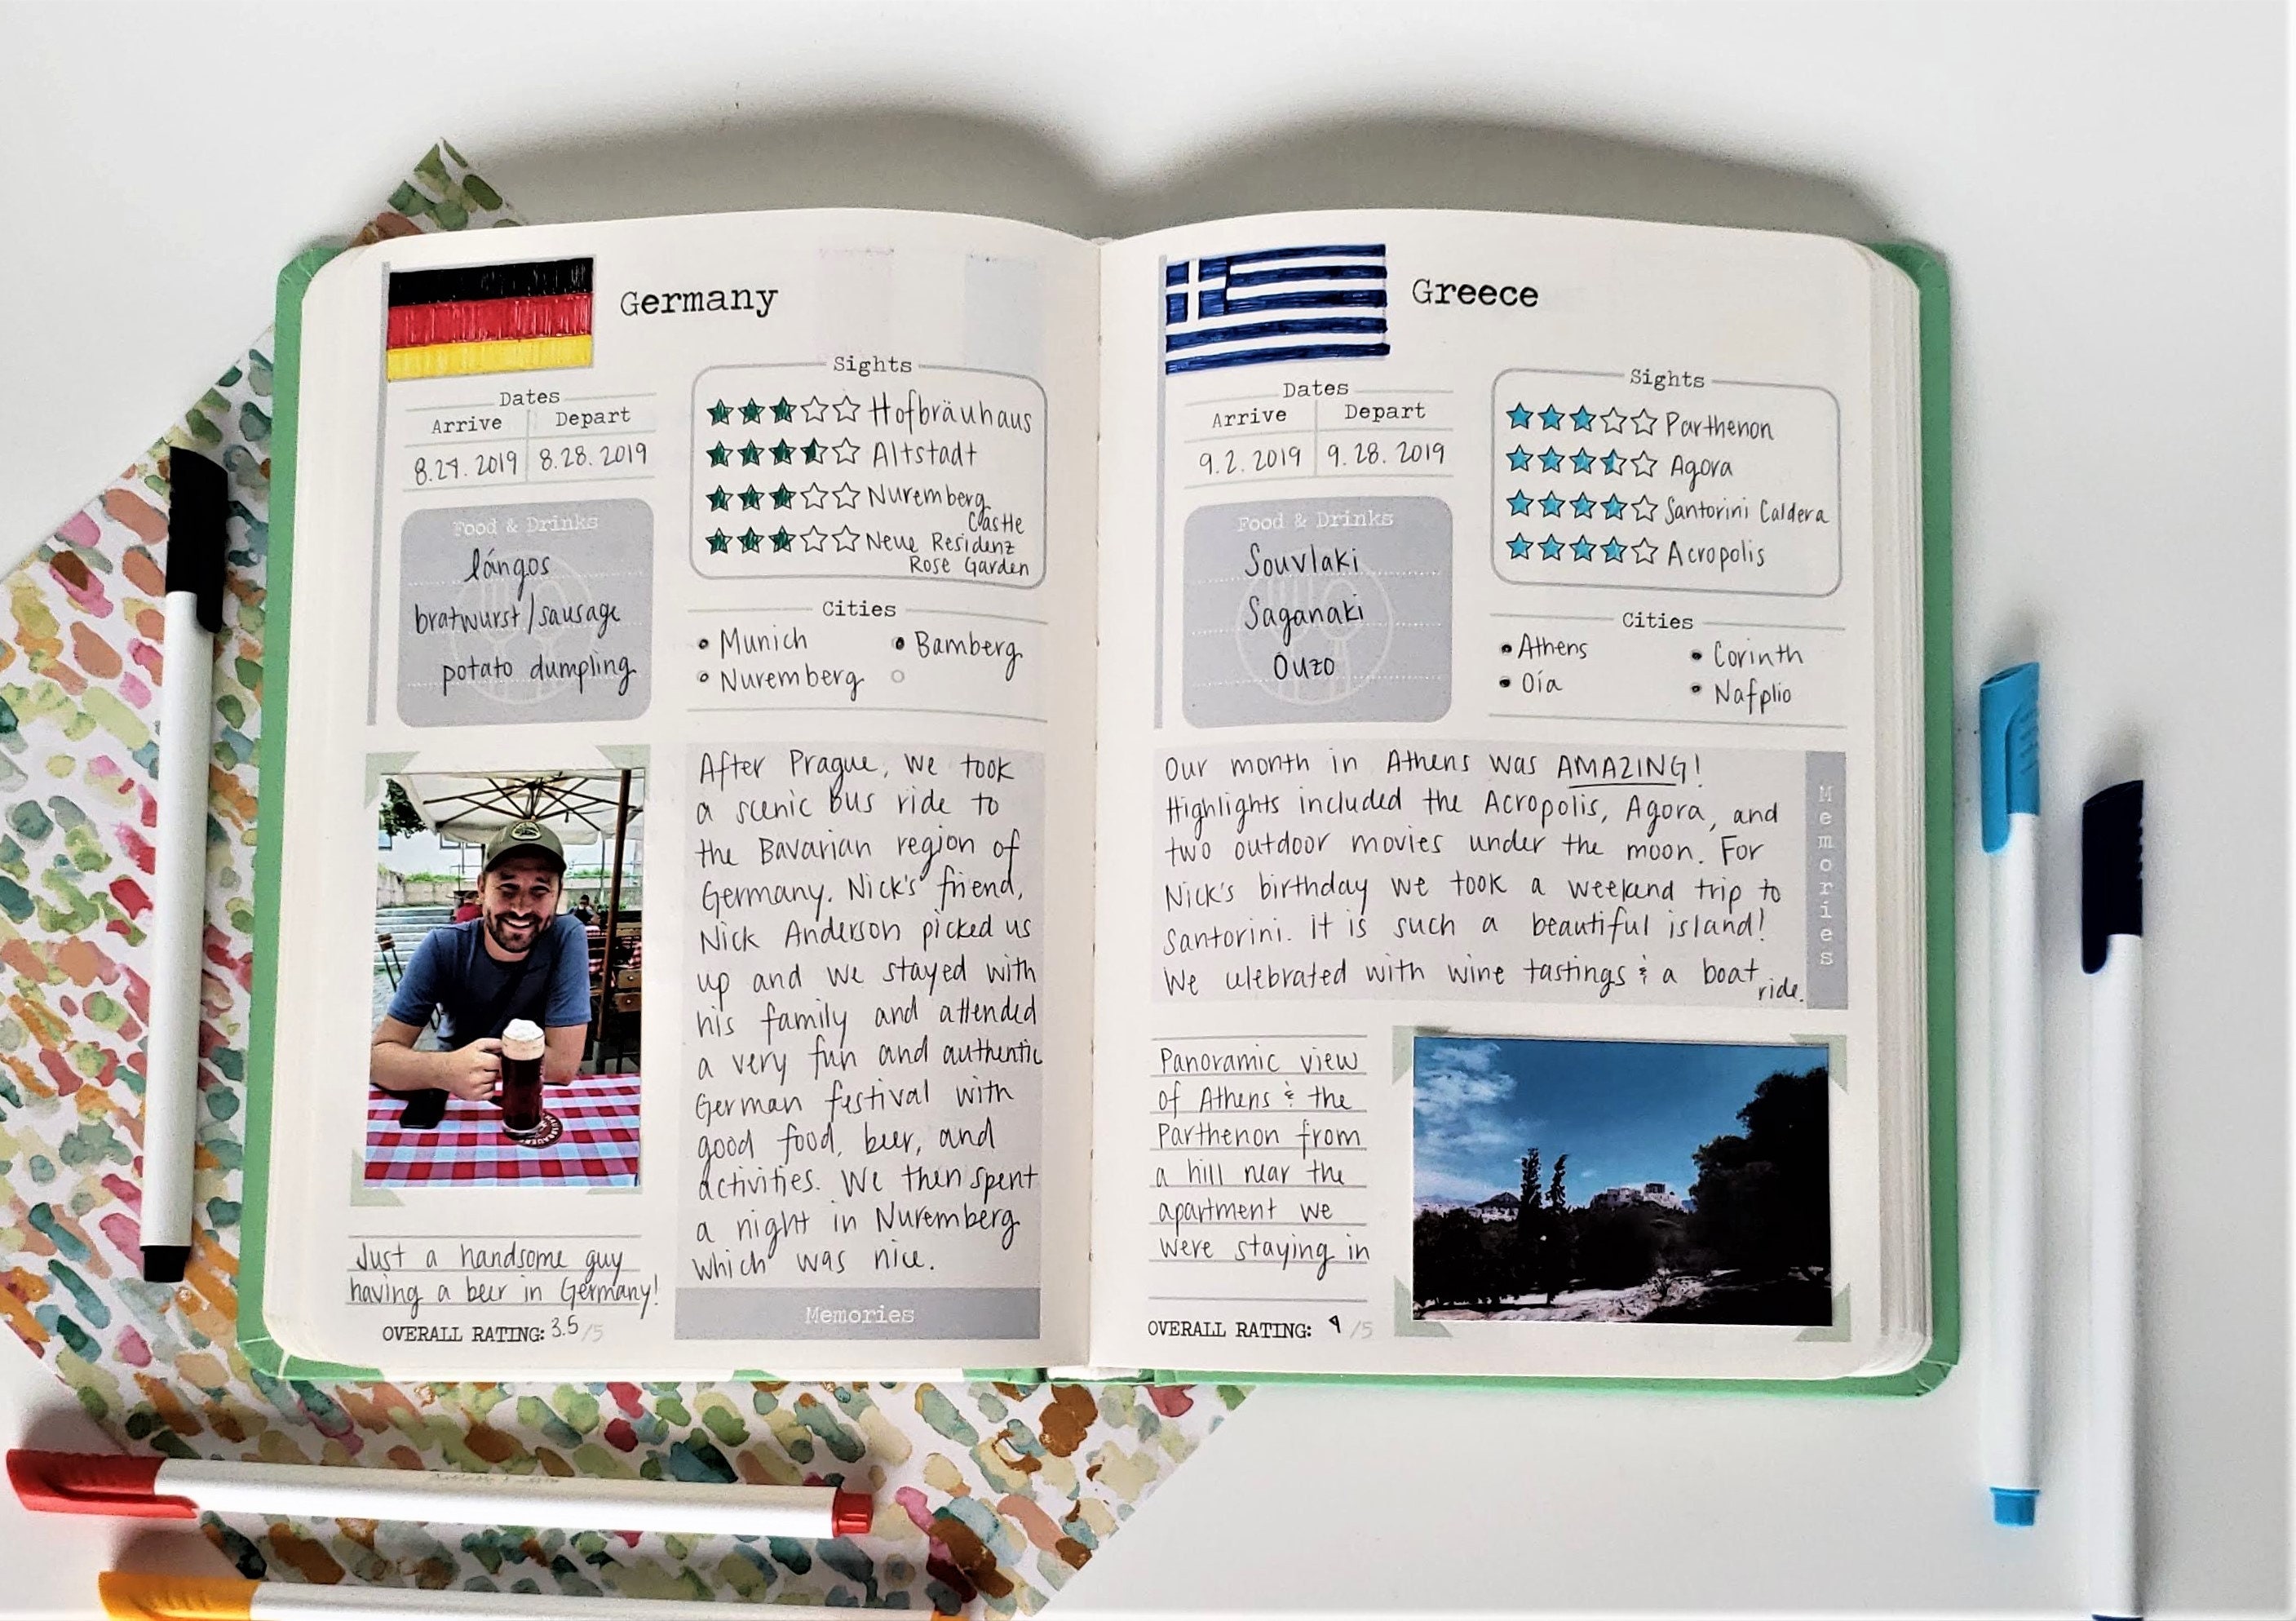 Travel Journal / Notebook - The World is a Book